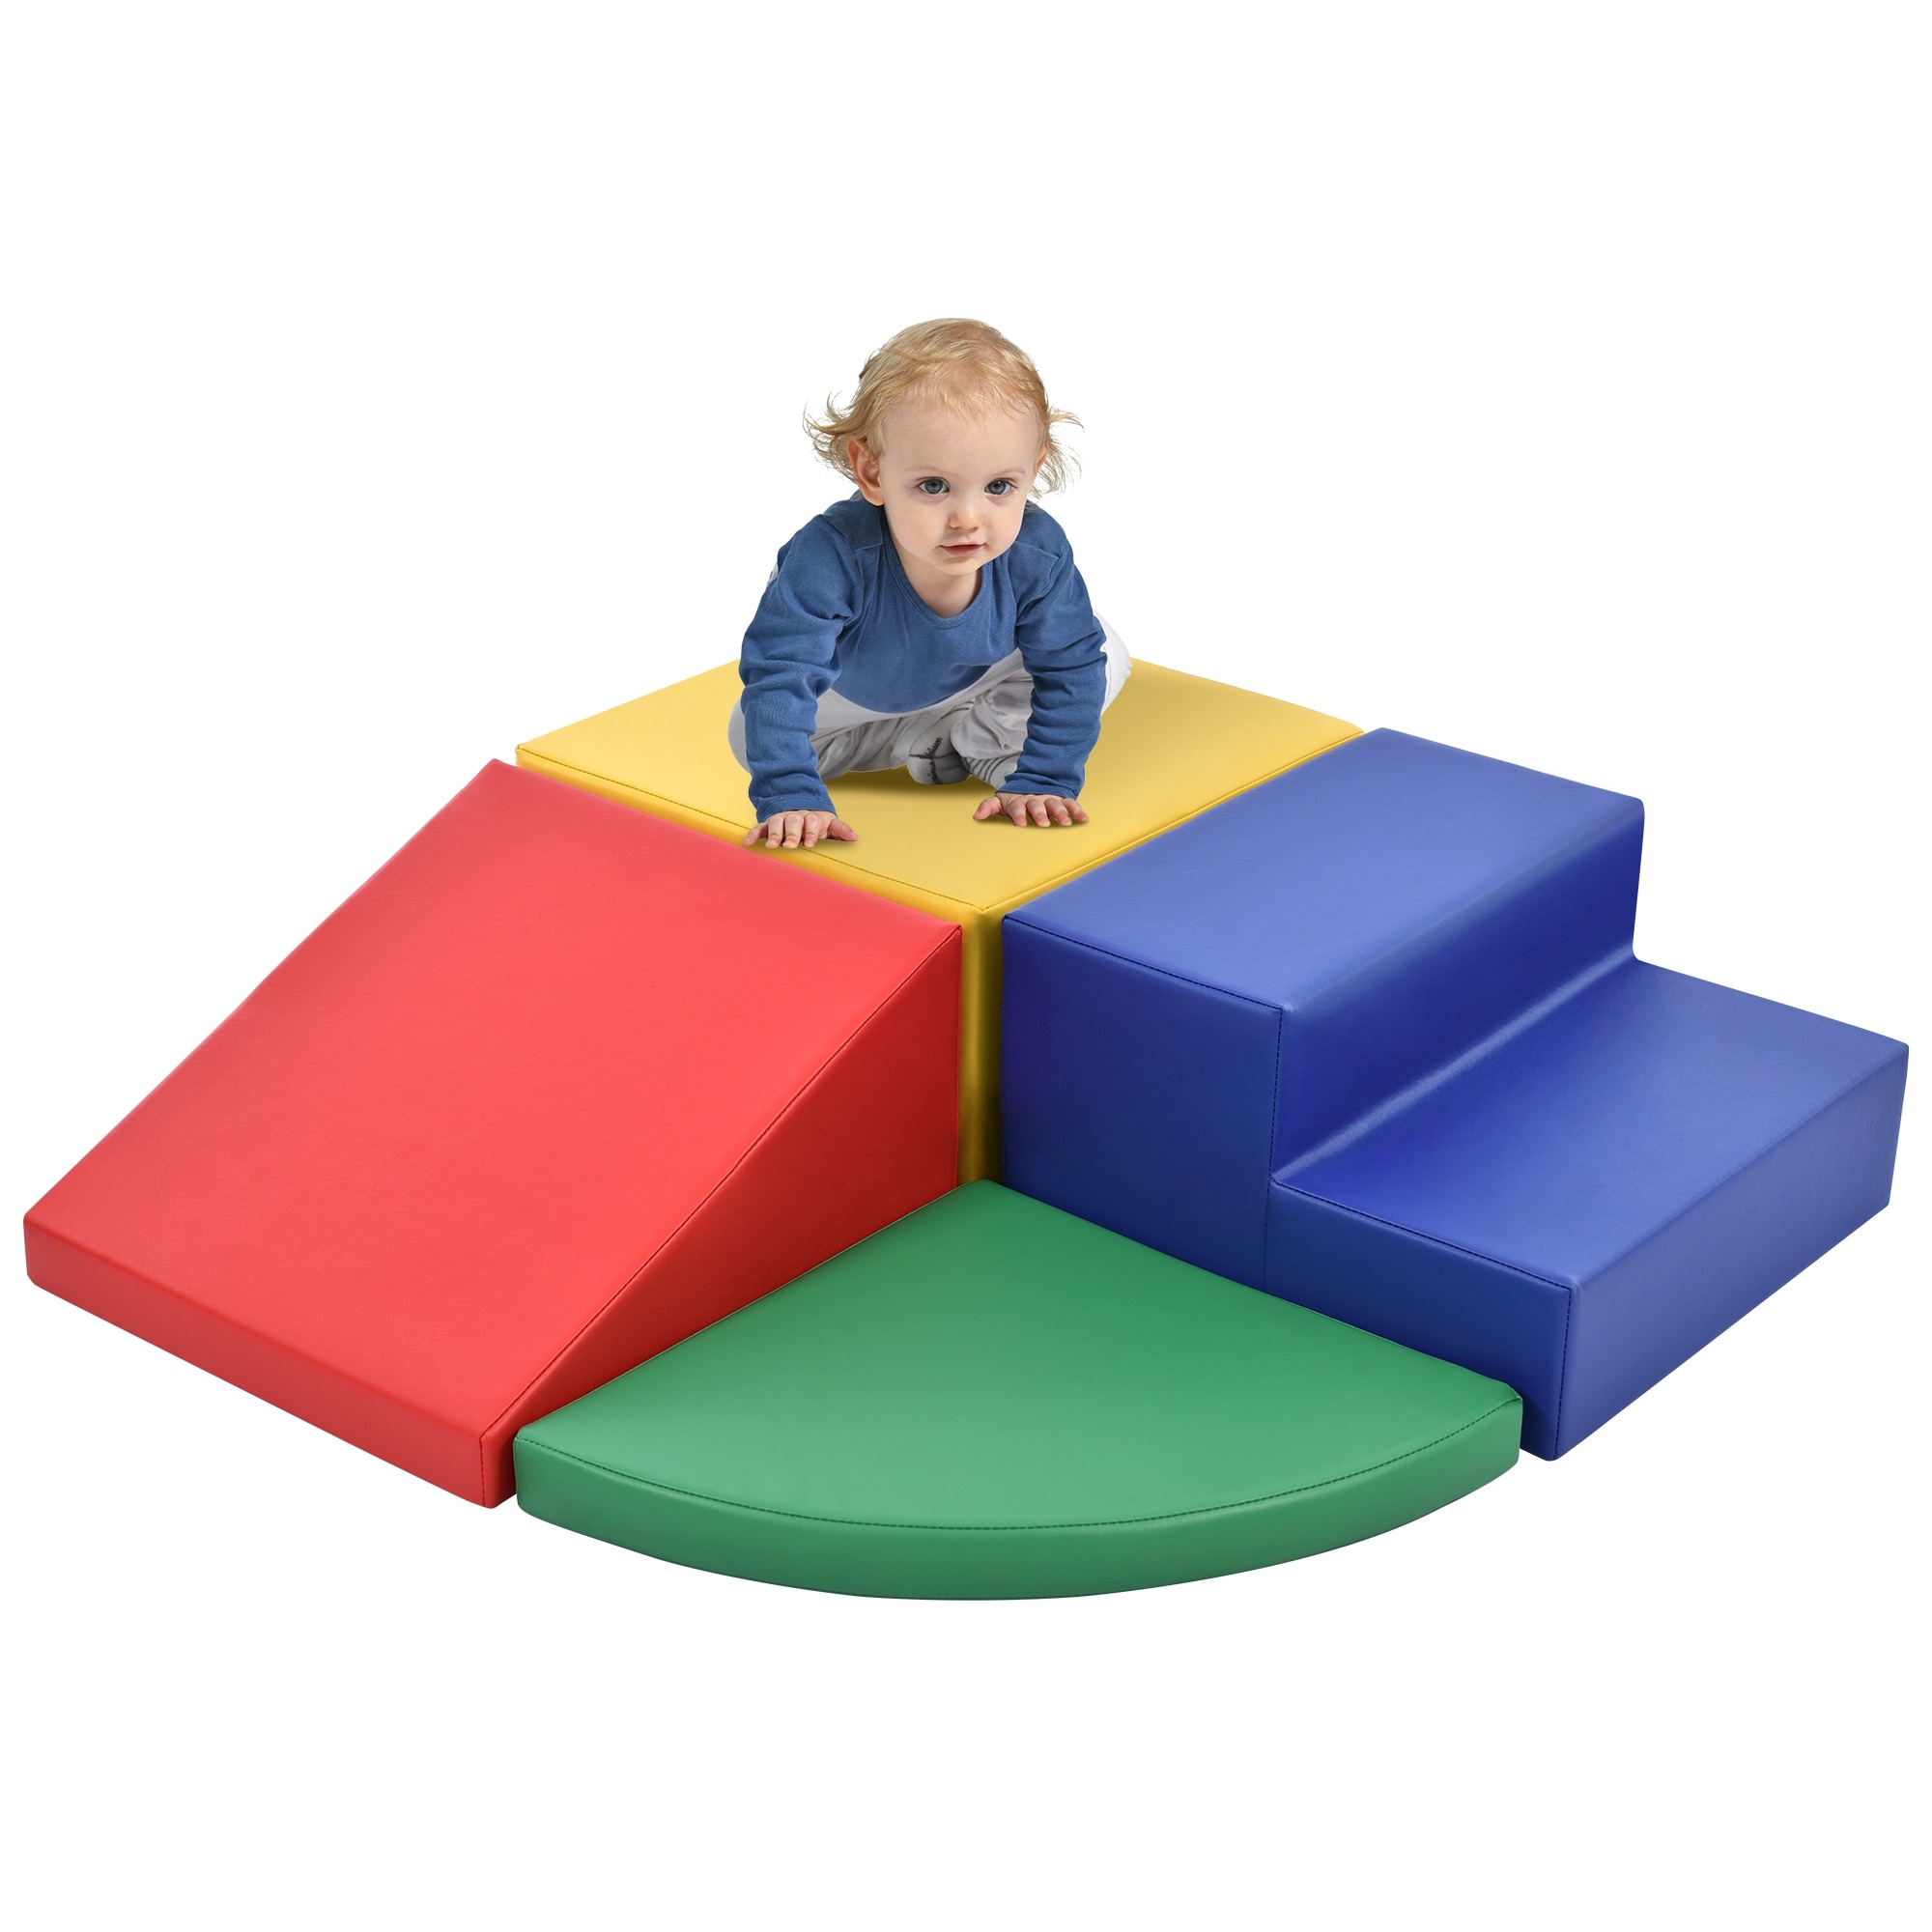 Soft Climb and Crawl Foam Playset, Play Structure ...